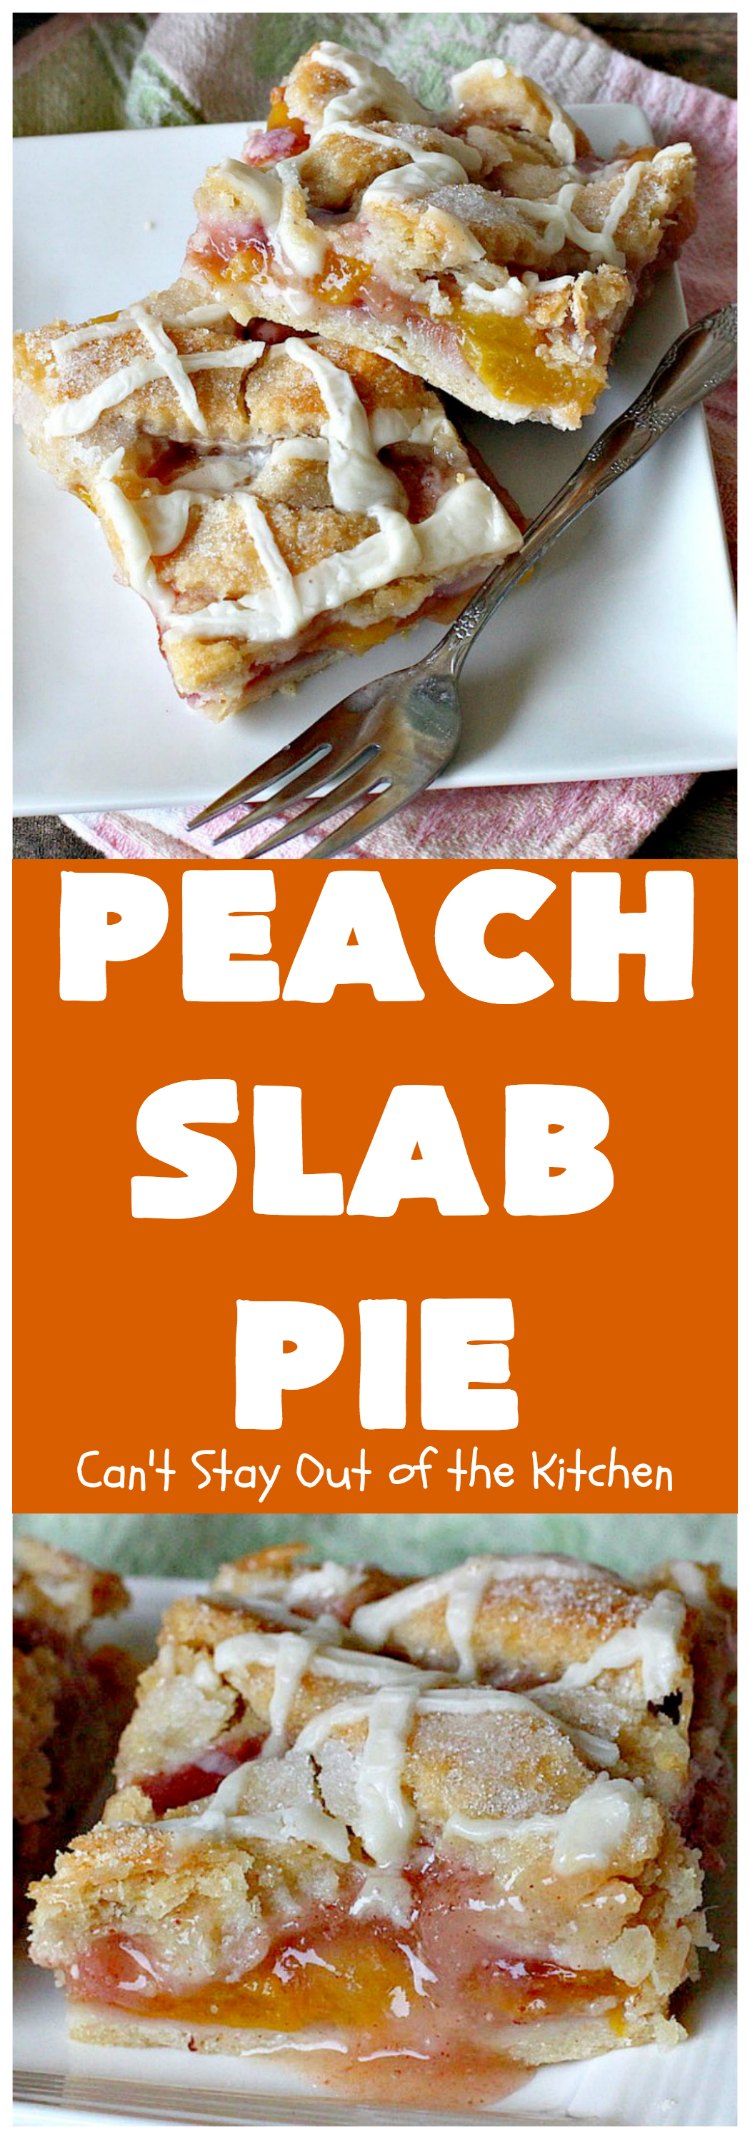 Peach Slab Pie | Can't Stay Out of the Kitchen